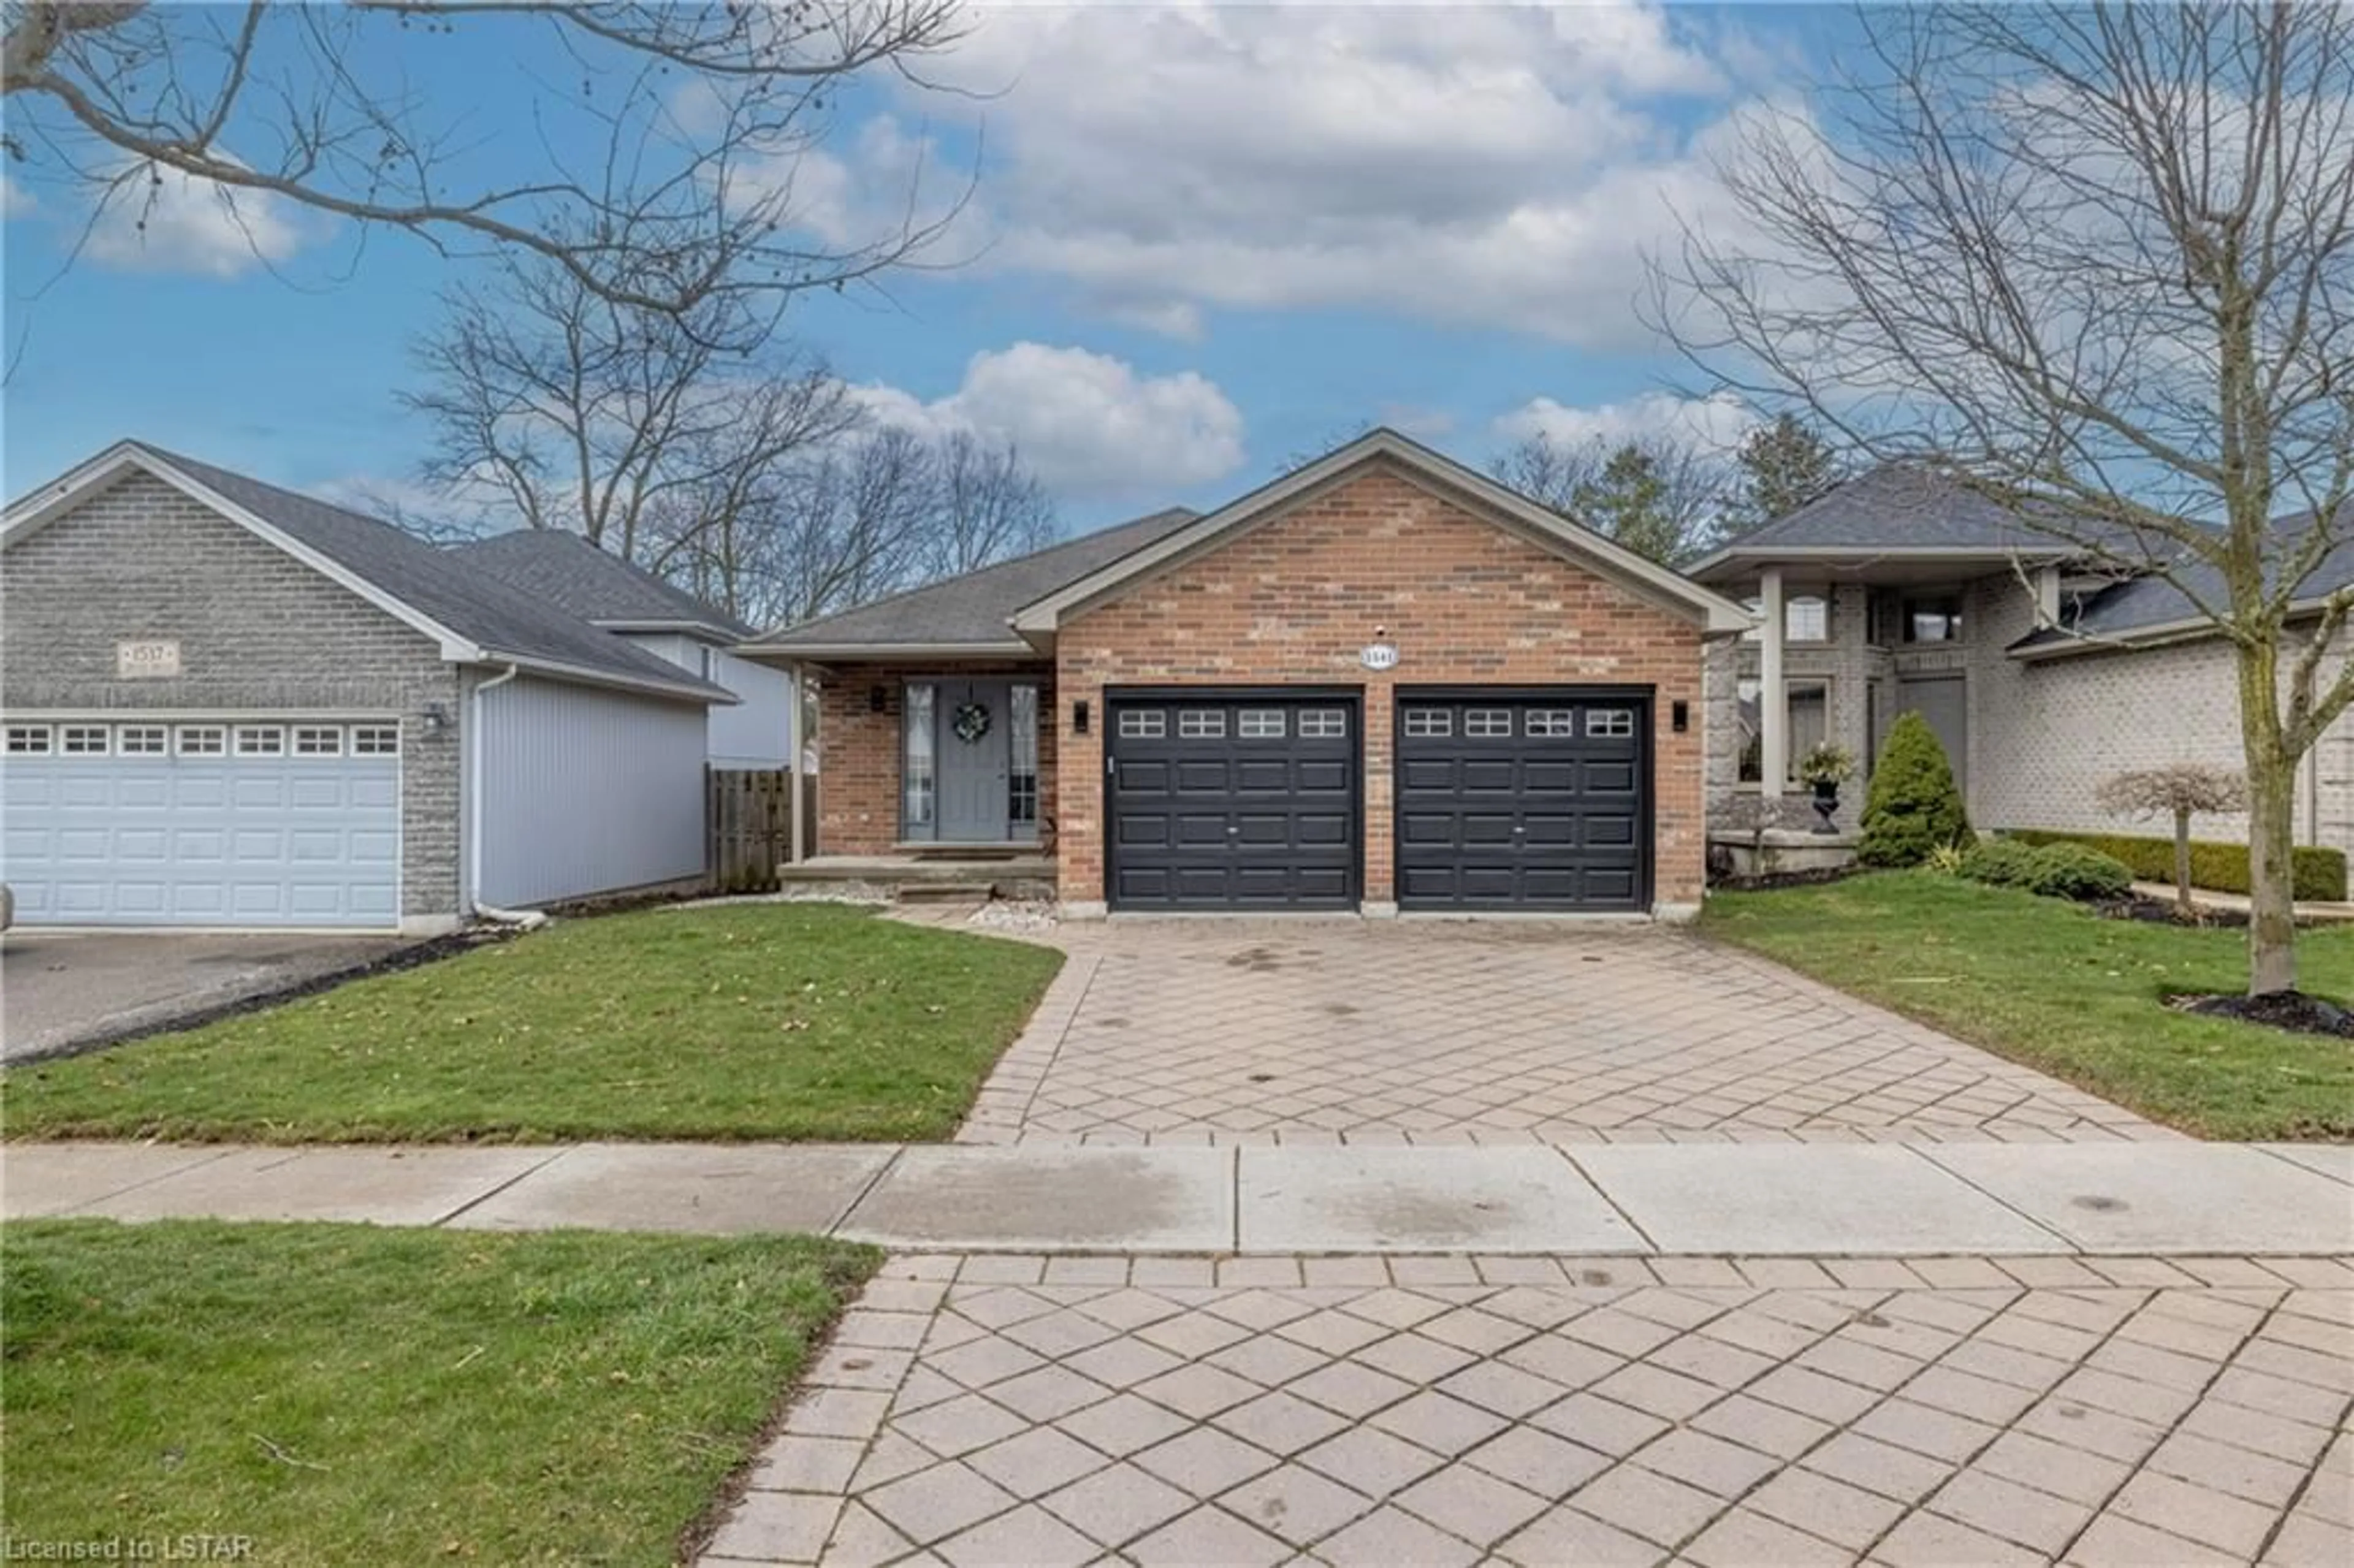 Home with brick exterior material for 1541 Devos Dr, London Ontario N5X 4K9